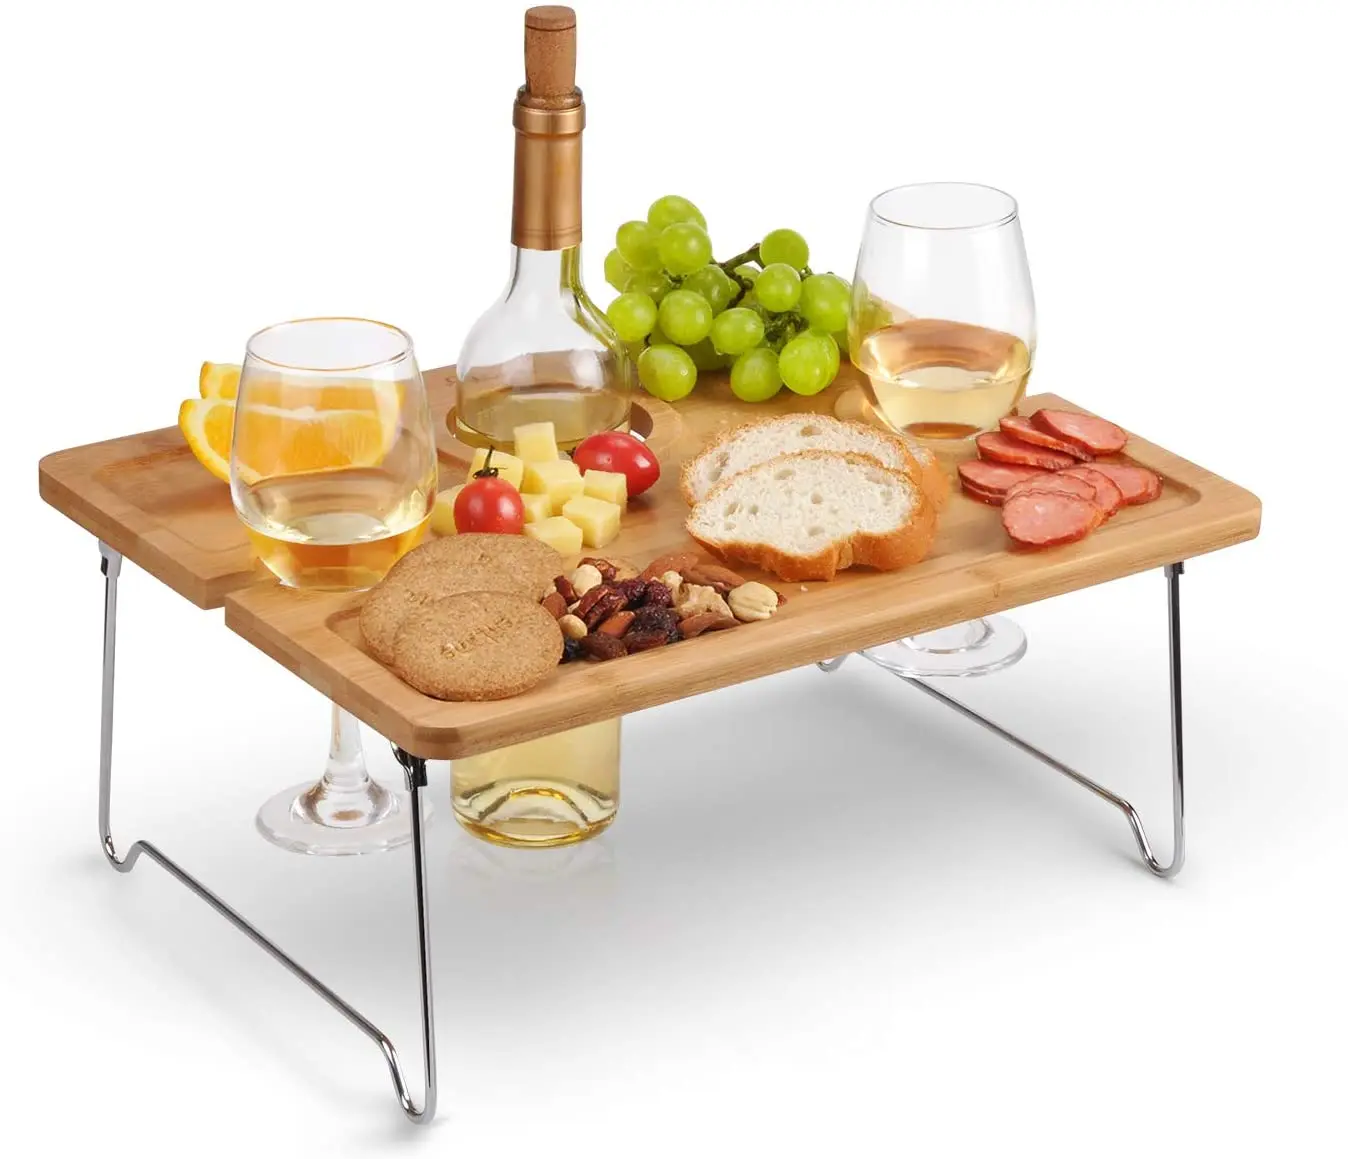 Alderaian Folding Wine Picnic Table with Glass Holder Beach Outdoors Portable Wooden Snack Table with Compartmental Tray for Cheese and Fruit Ideal for Camping 